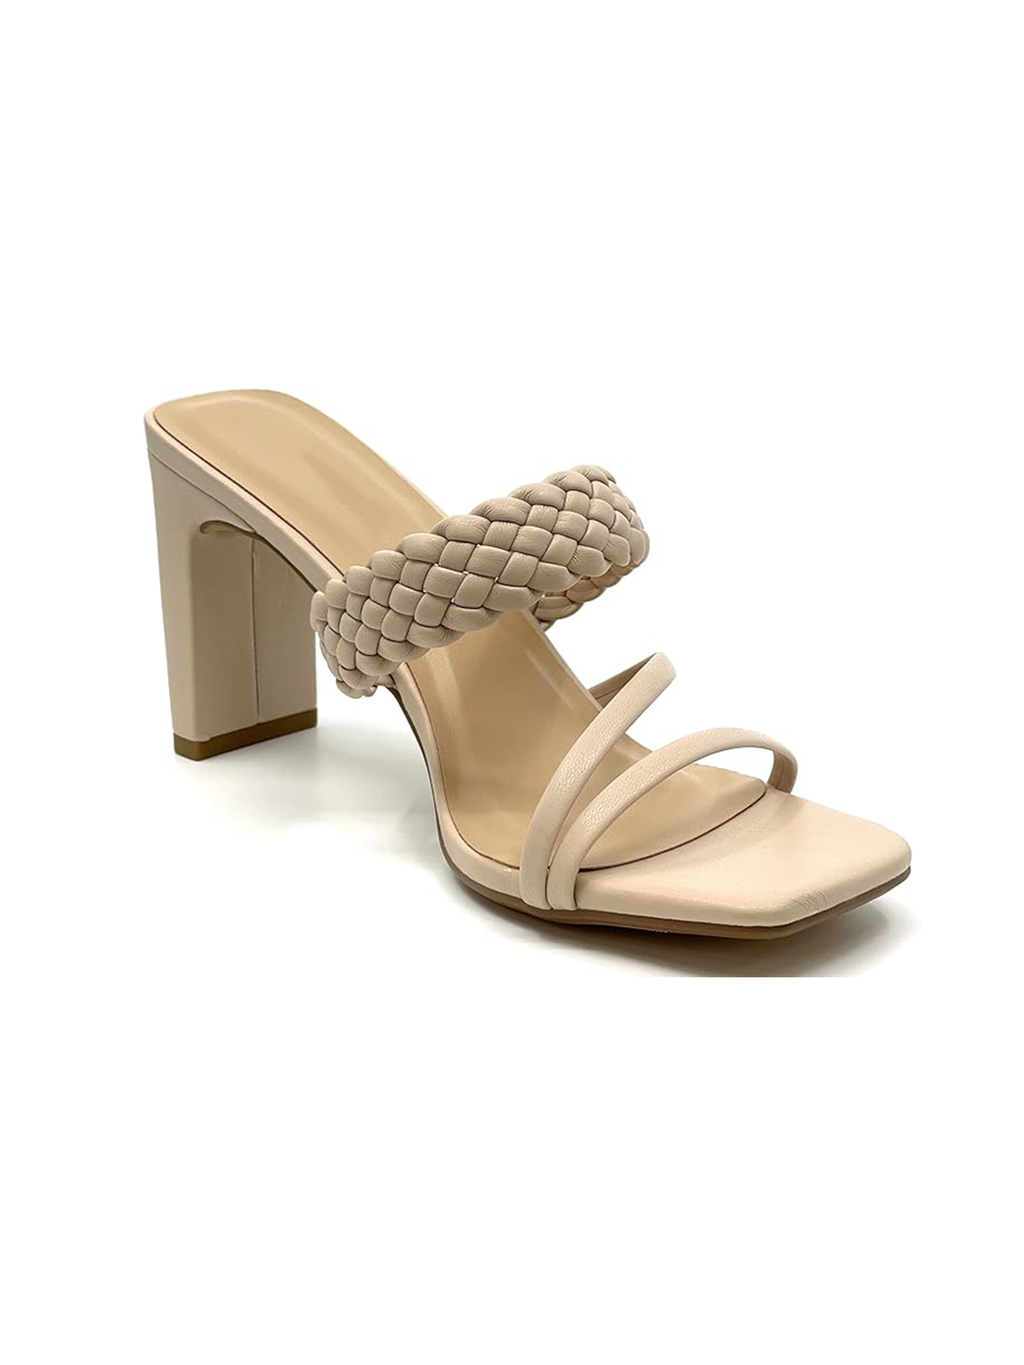 Carmen Heel in Nude - Final Sale - Stitch And Feather